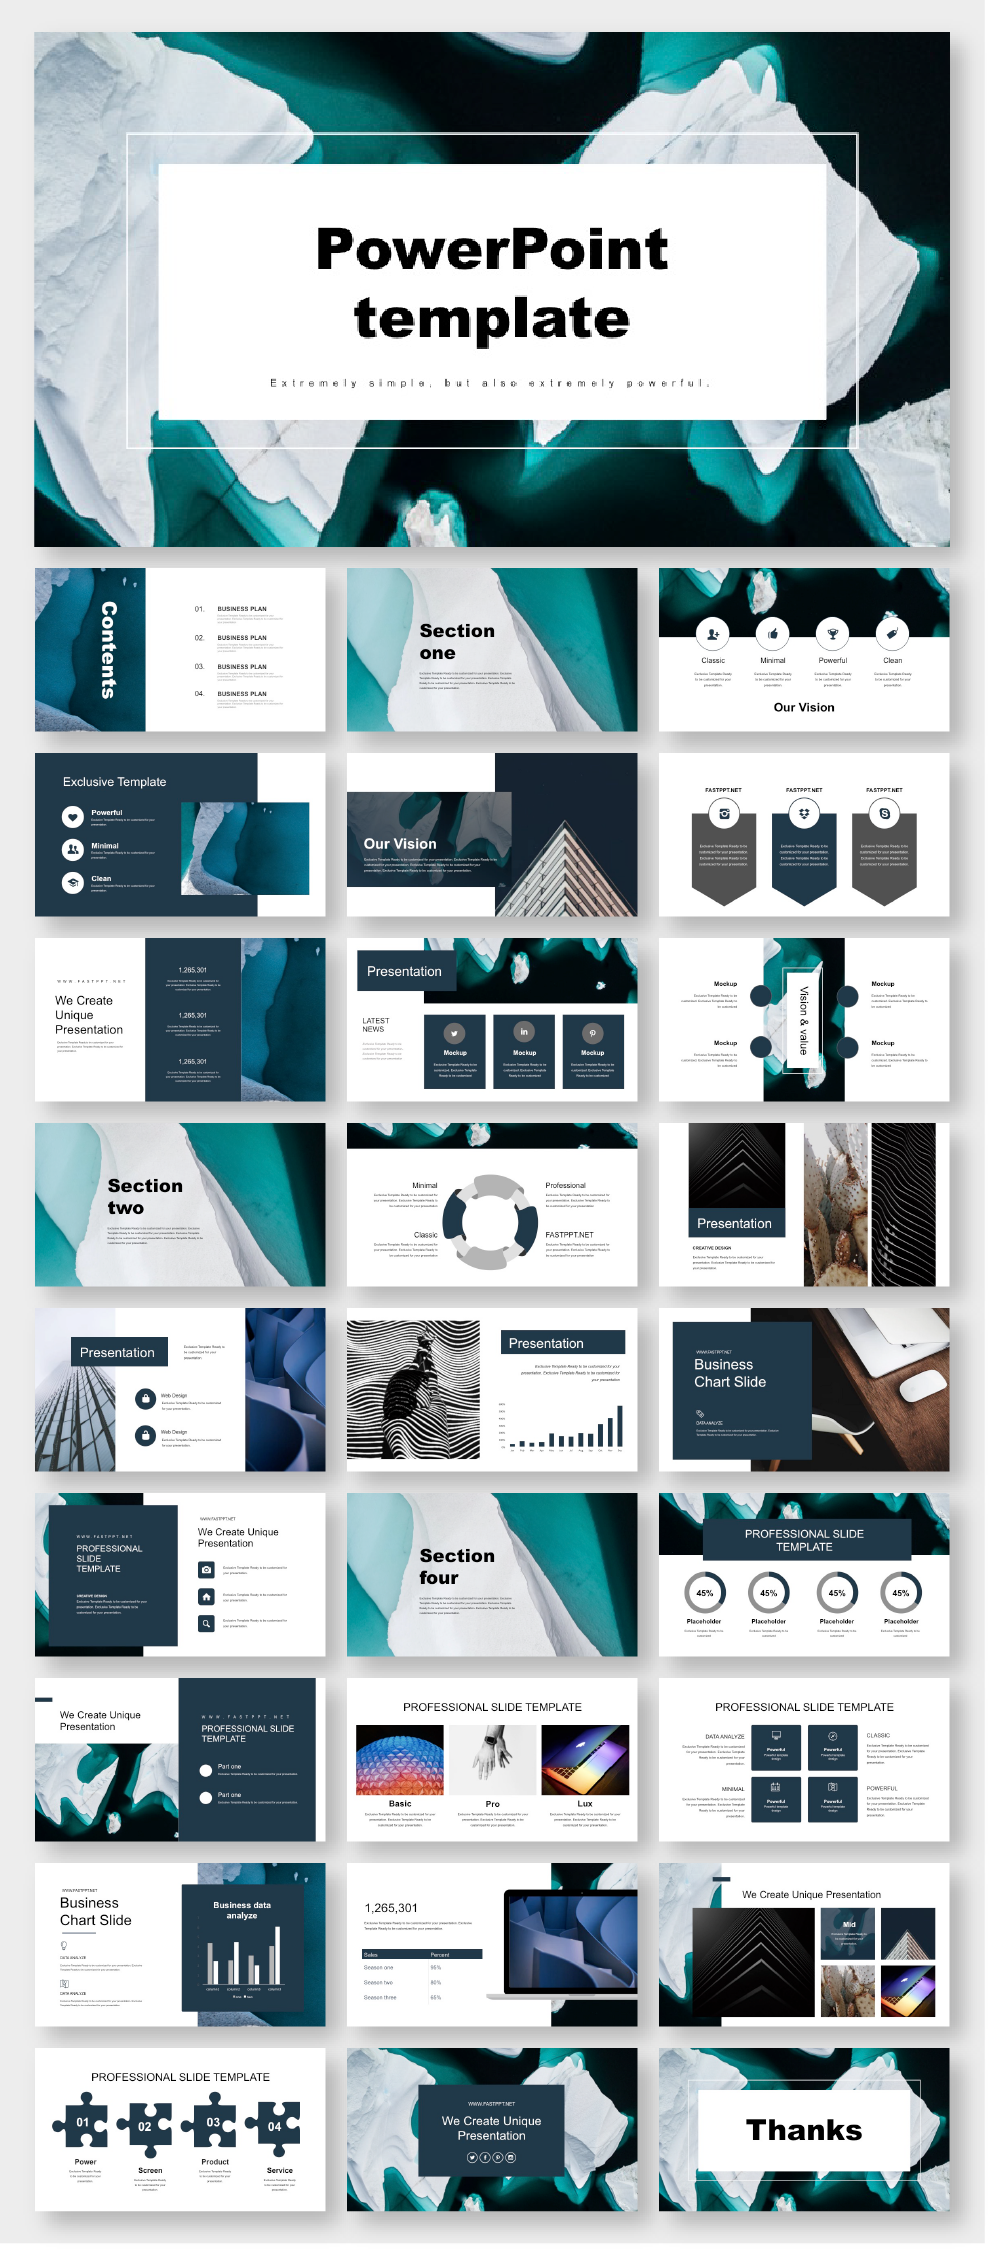 Business Plan Powerpoint Template Original And High Quality Powerpoint Templates Powerpoint Presentation Design Powerpoint Design Templates Powerpoint Templates